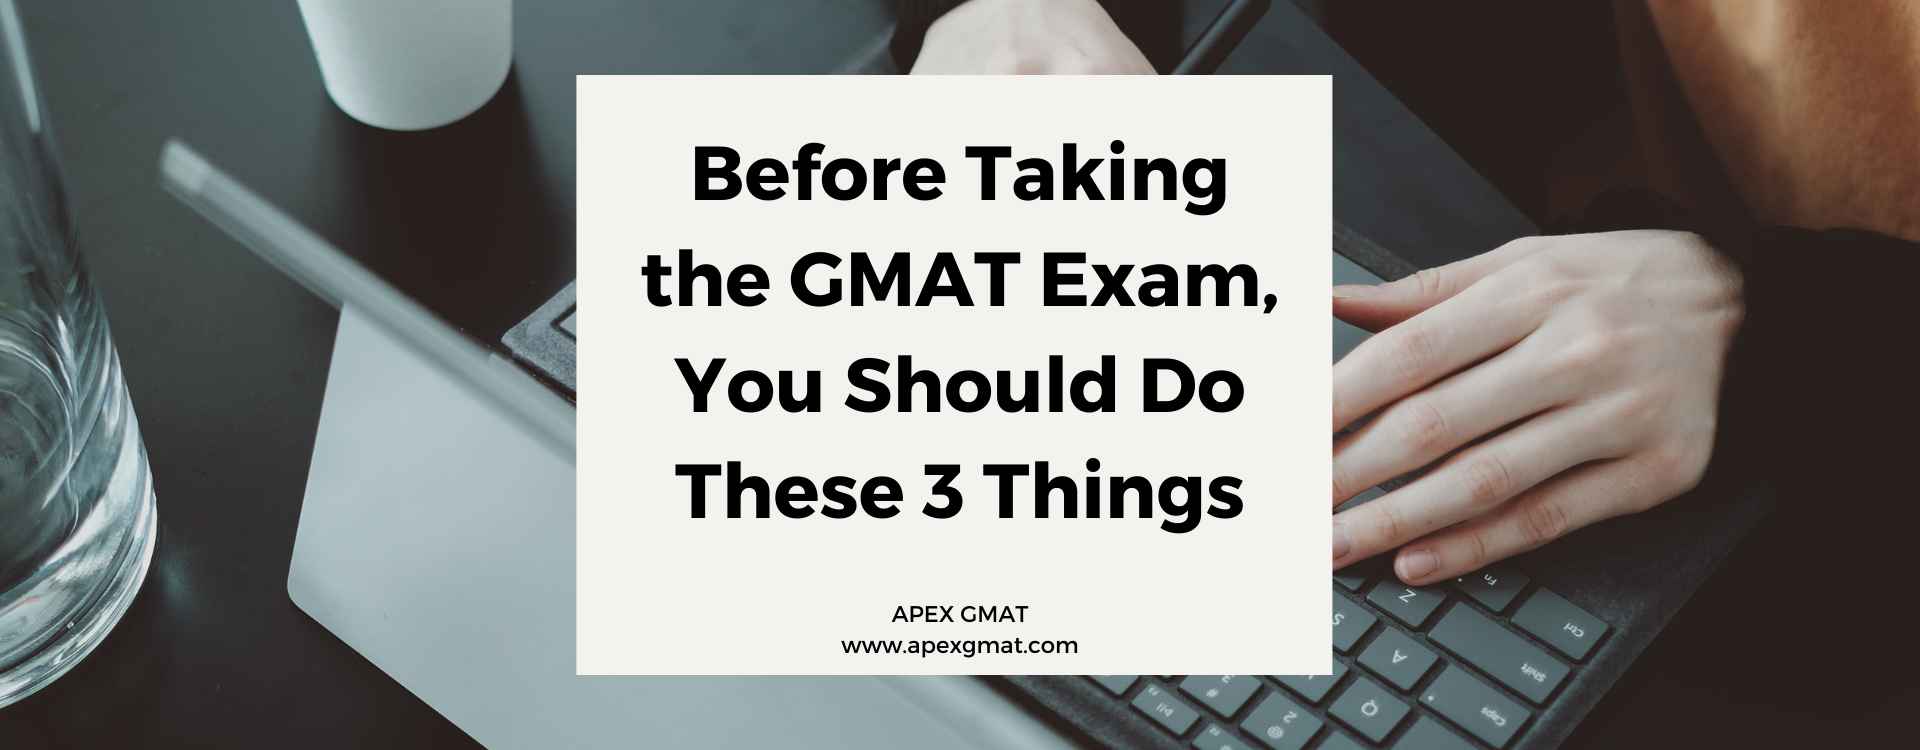 Before Taking The GMAT Exam, You Should Do These 3 Things